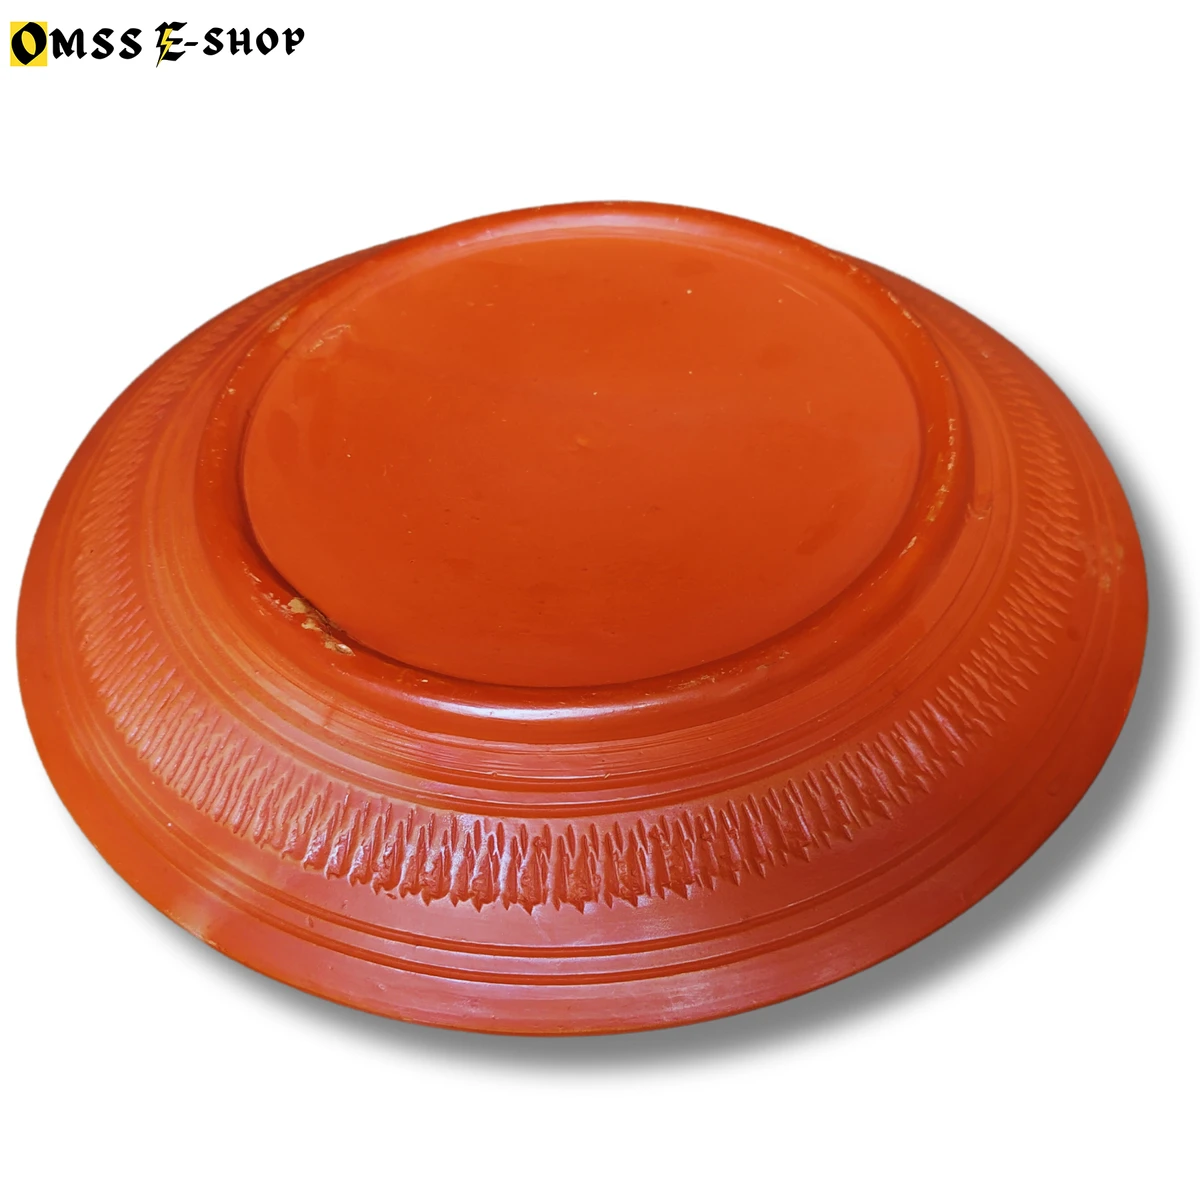 Beautiful and durable terracotta clay plates Flower Design RP-100DH-OS